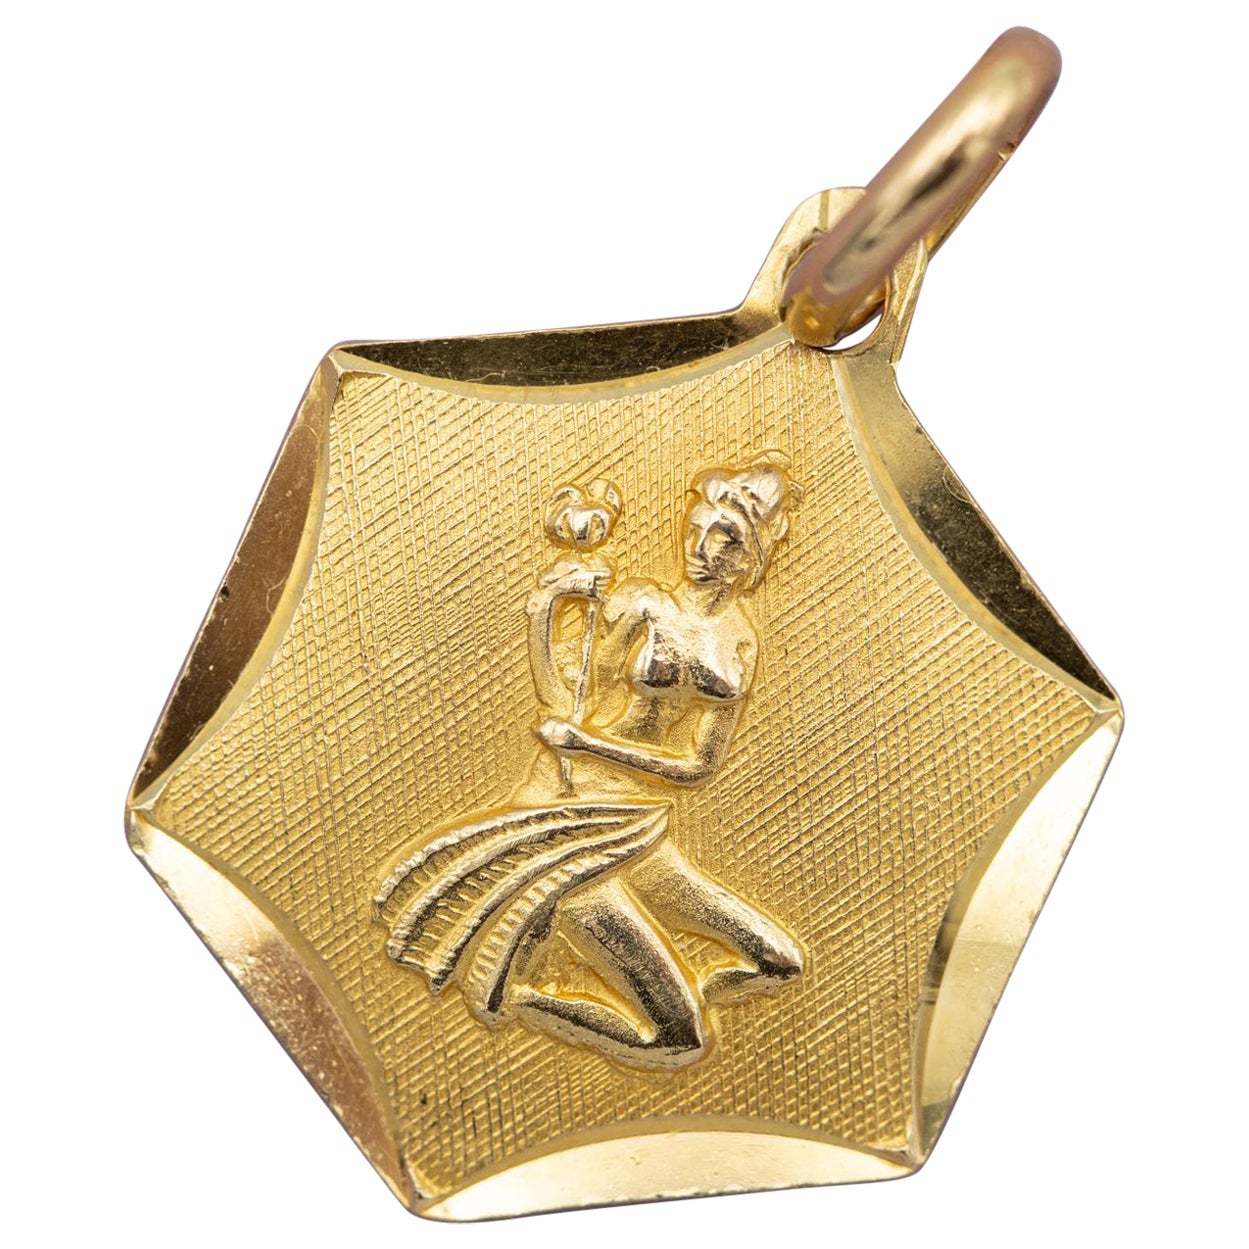 Vintage 18k zodiac charm pendant - Virgo charm - solid yellow gold - Star Sign For Sale